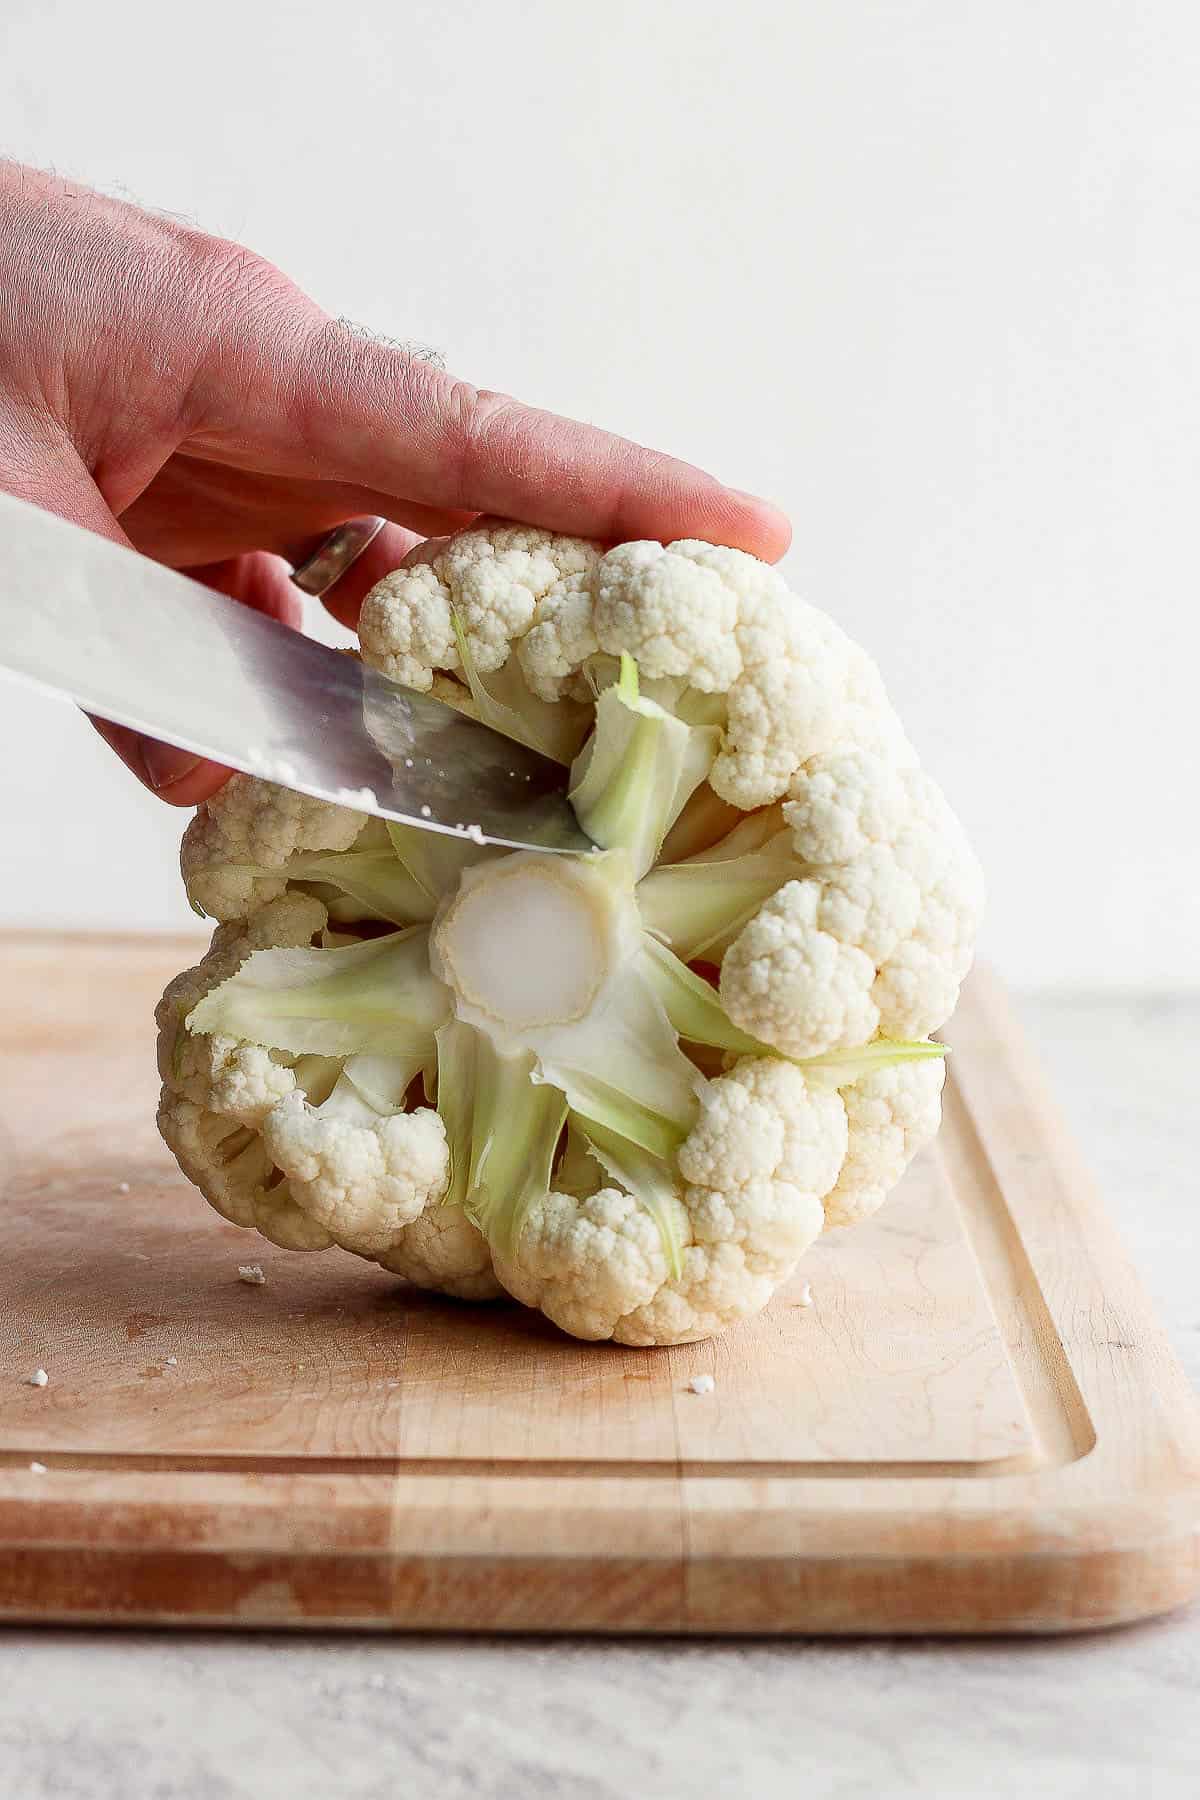 A head of cauliflower on a cutting board and the stem being removed.